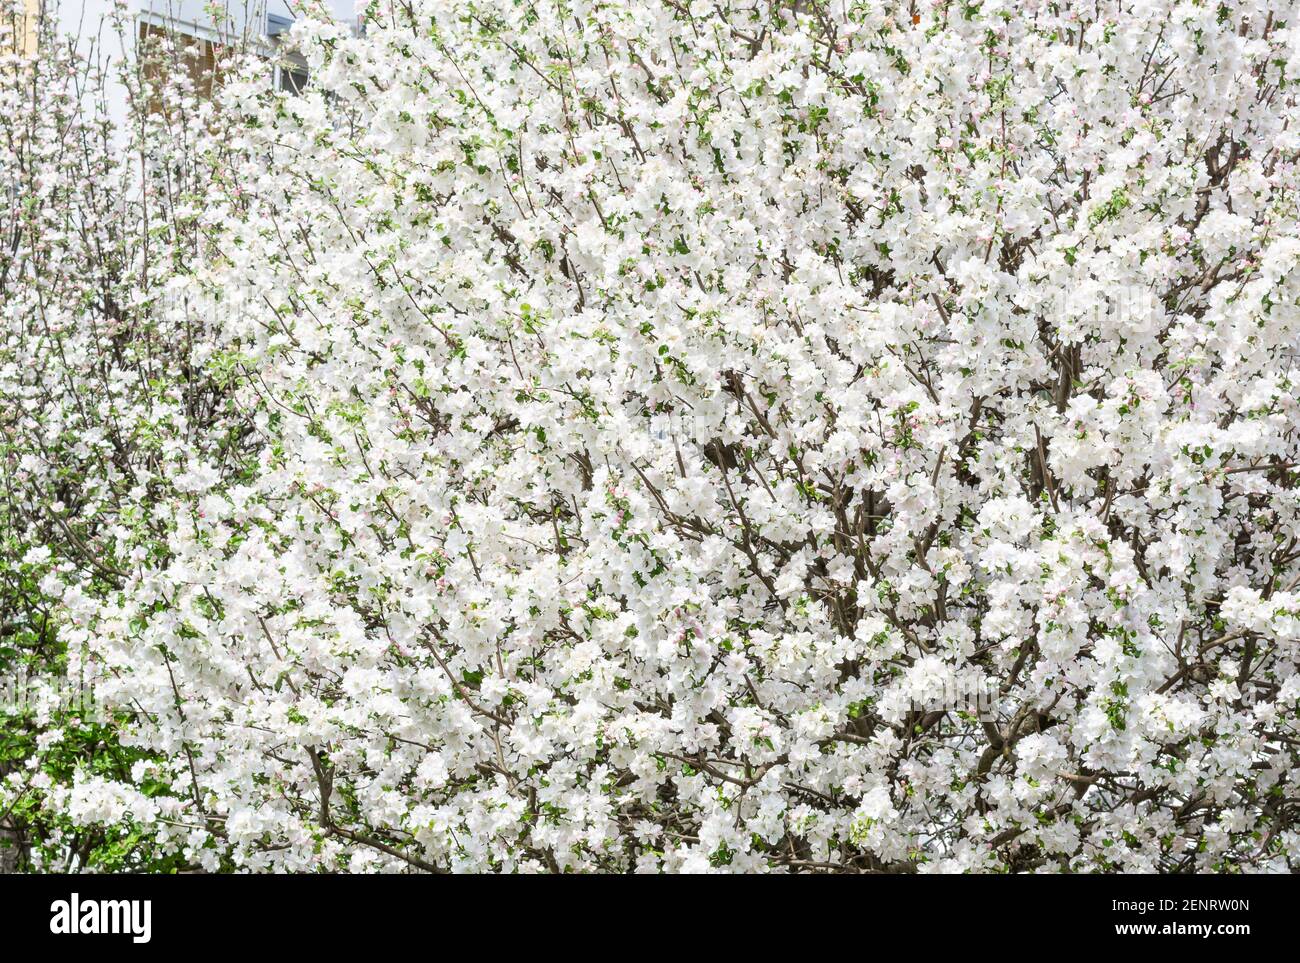 Branches of flowering apple trees in June, horizontal format Stock Photo